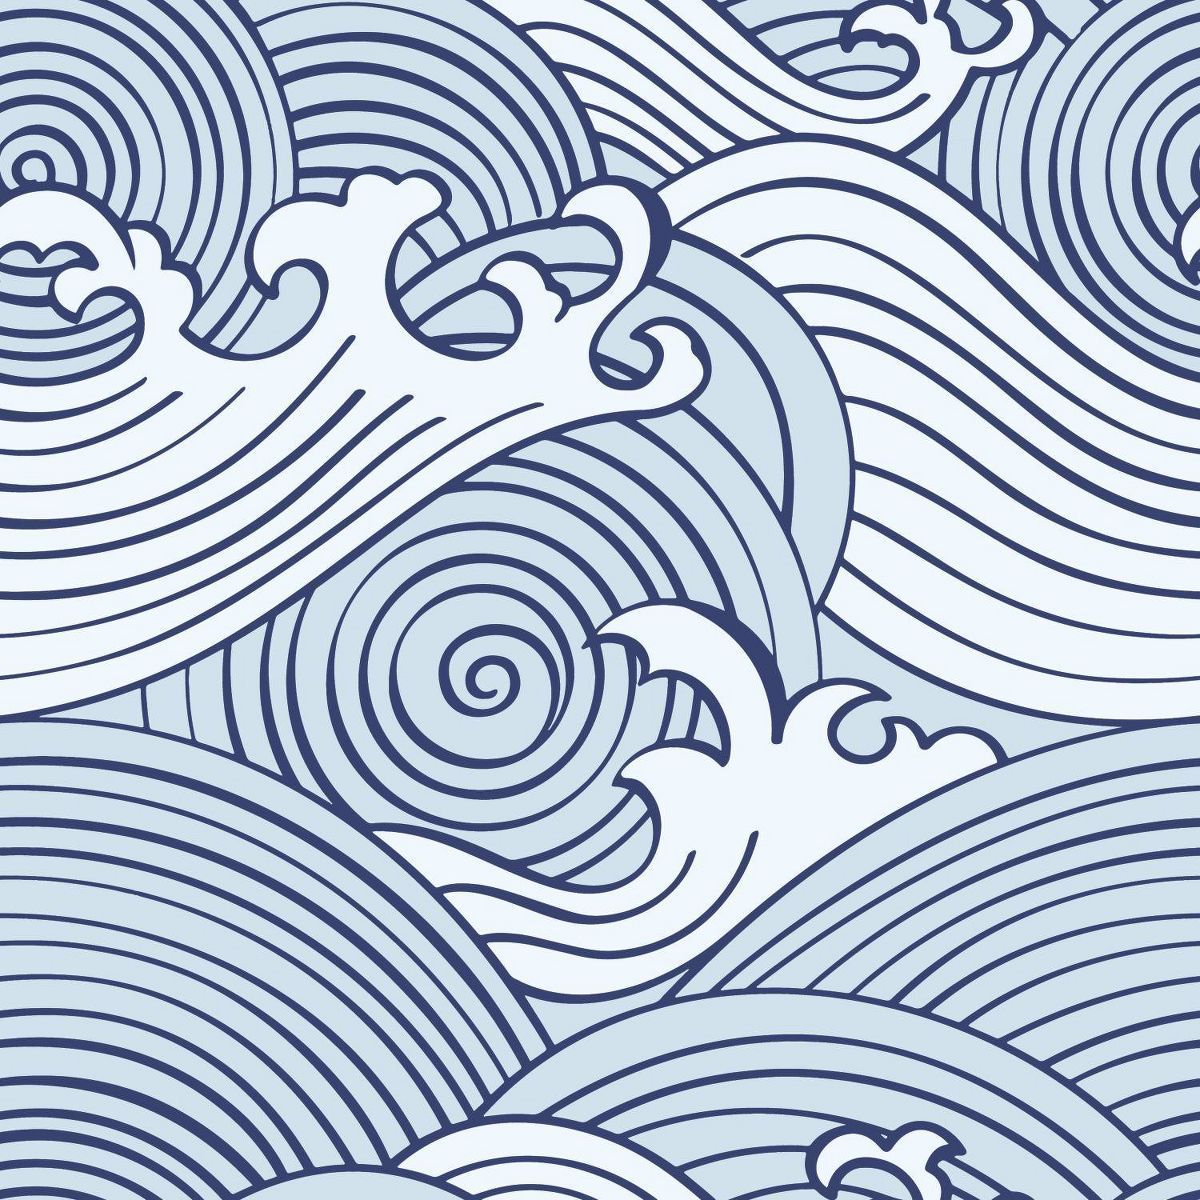 RoomMates Asian Waves Peel and Stick Wallpaper Blue/White | Target